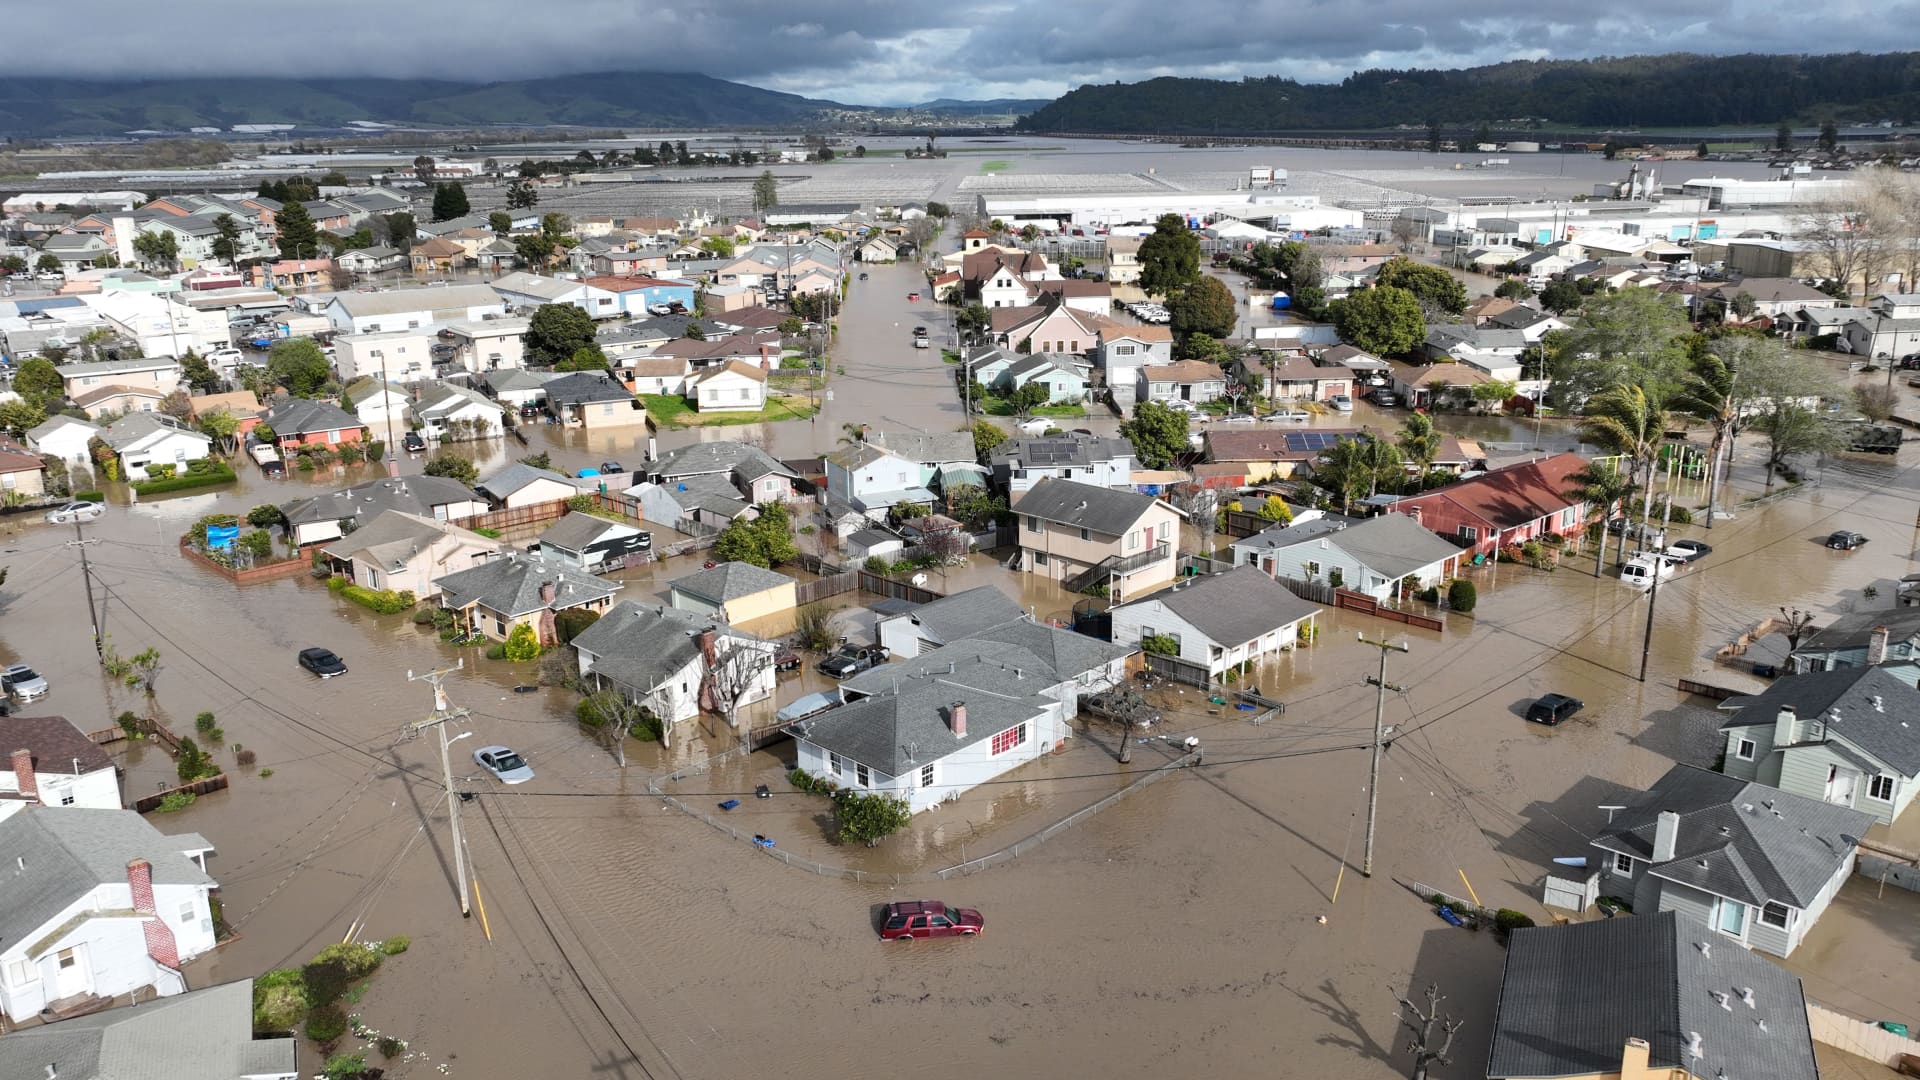 This aerial photograp shows vehicles and homes engulfed by floodwaters in Pajaro, California on Saturday, March 11, 2023.